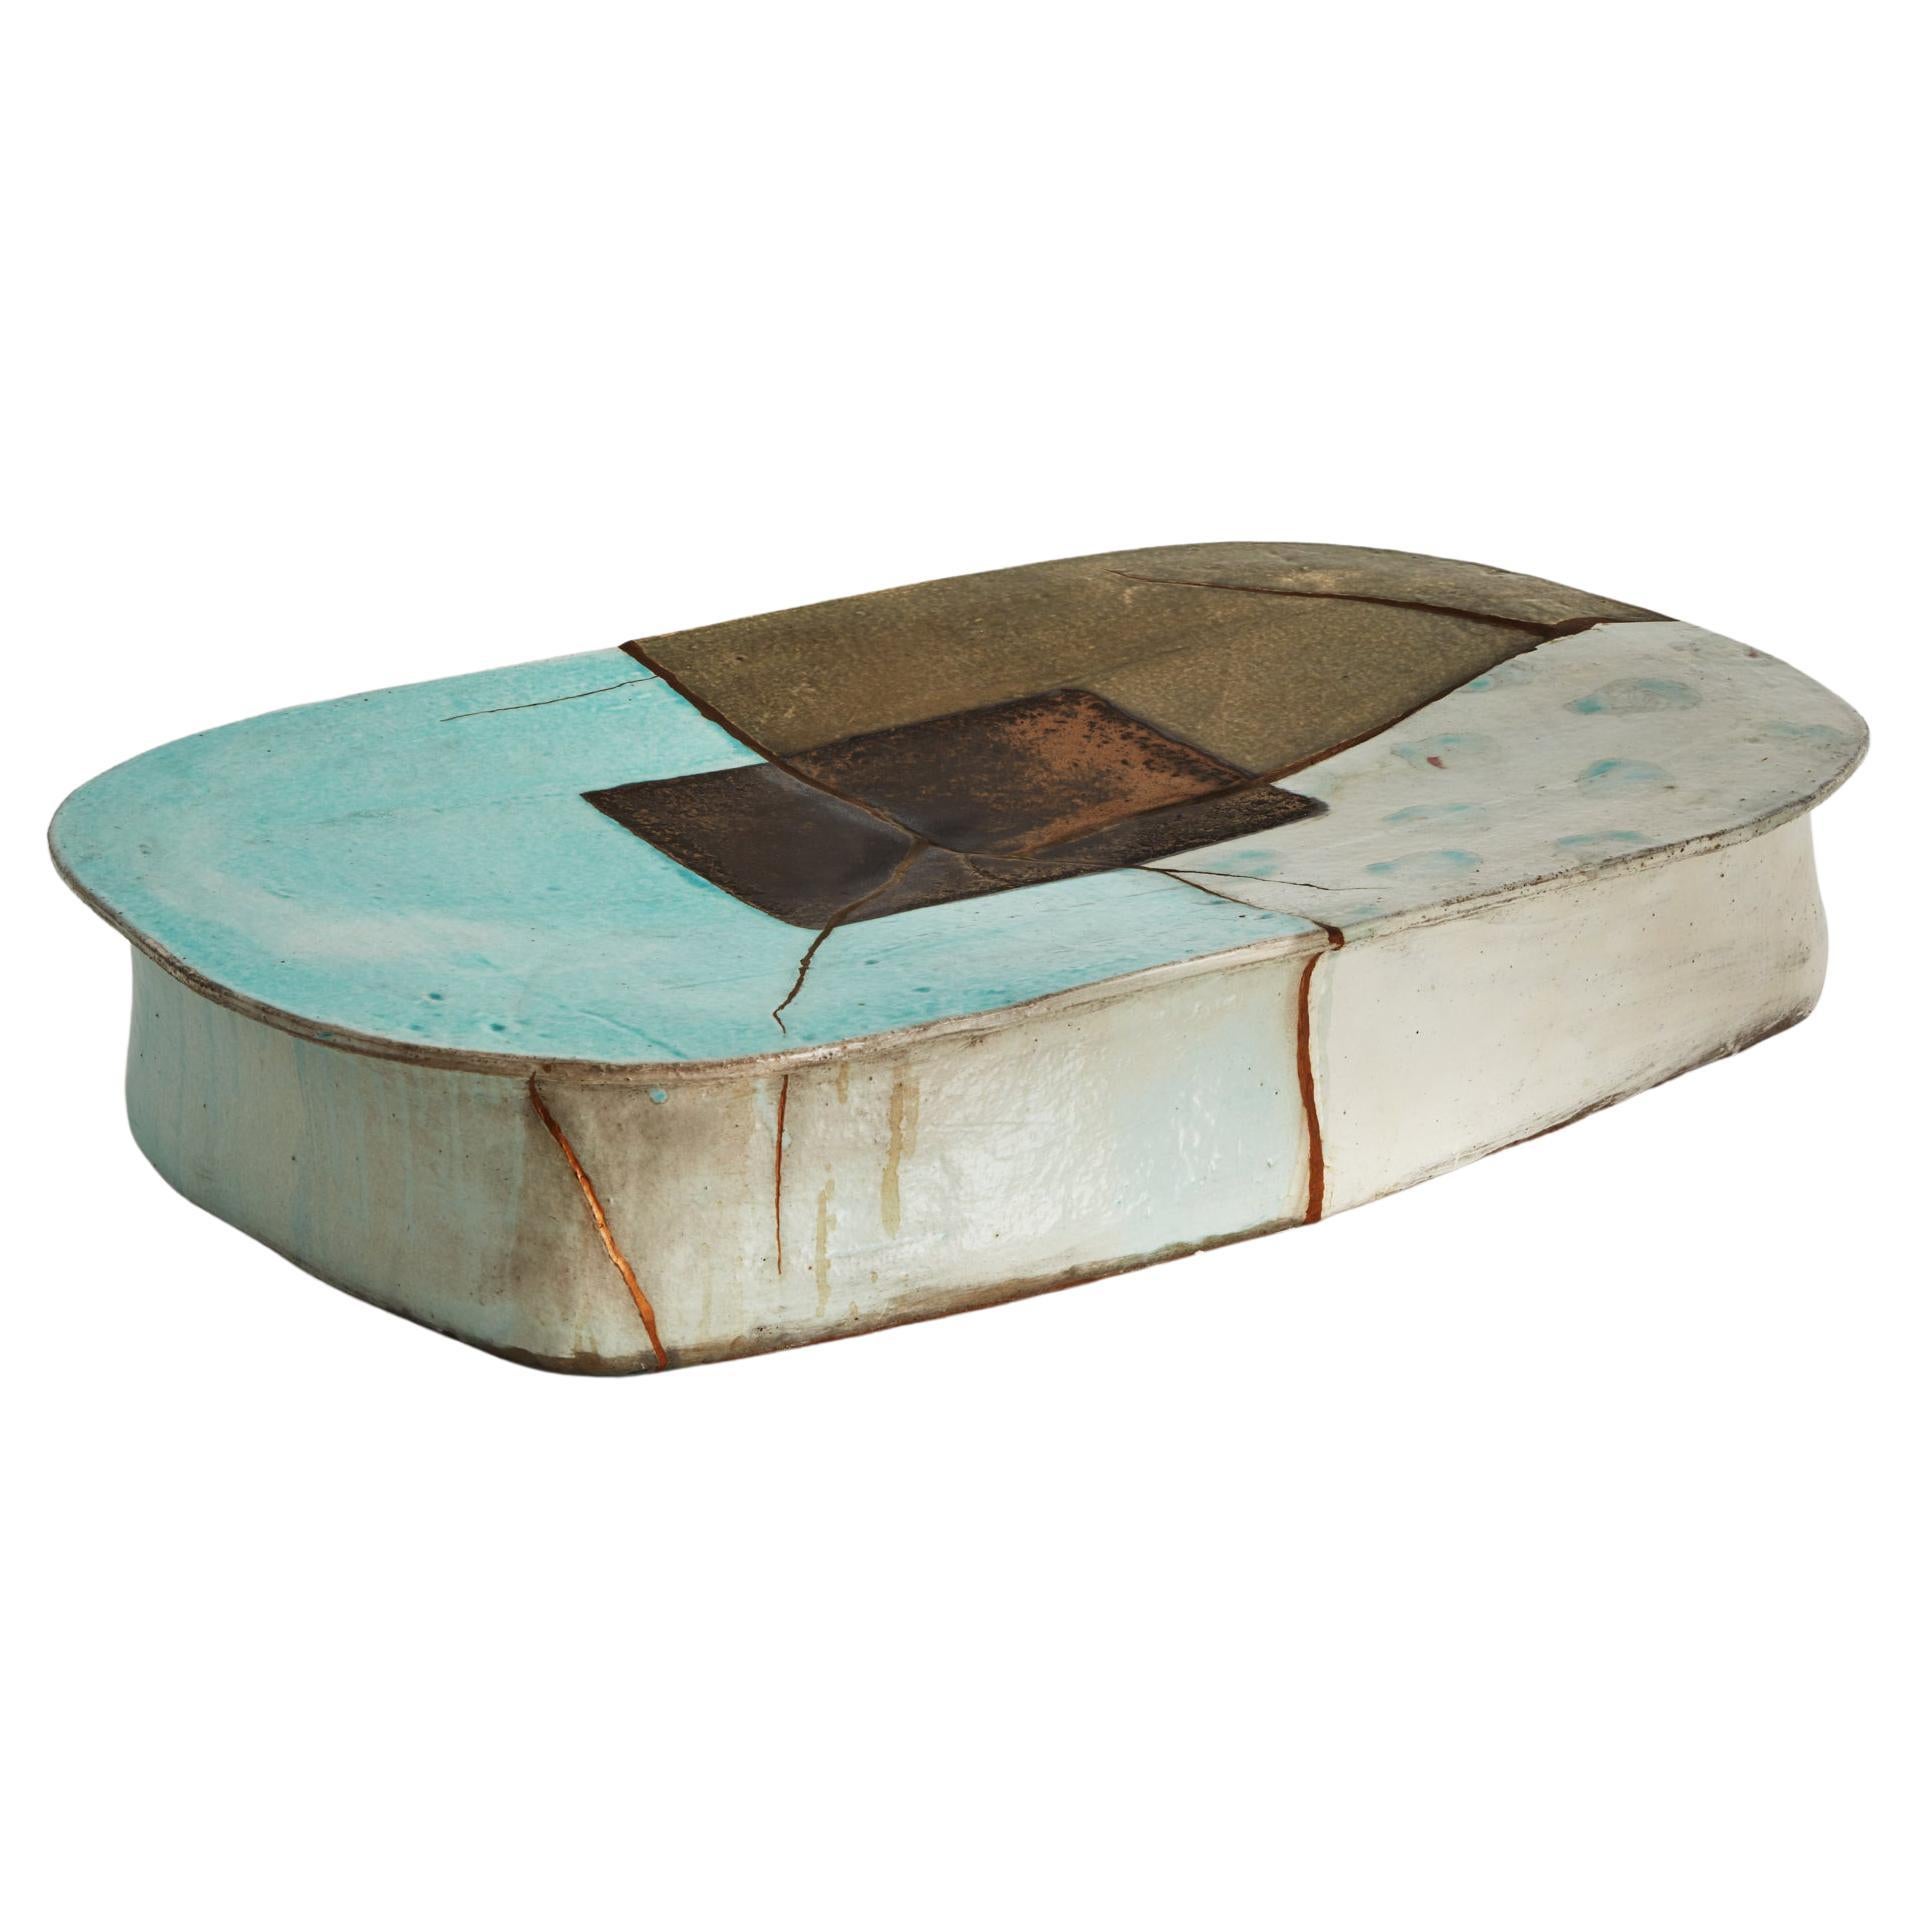 Low Table in Glazed Ceramic by Hun-Chung Lee, 2018